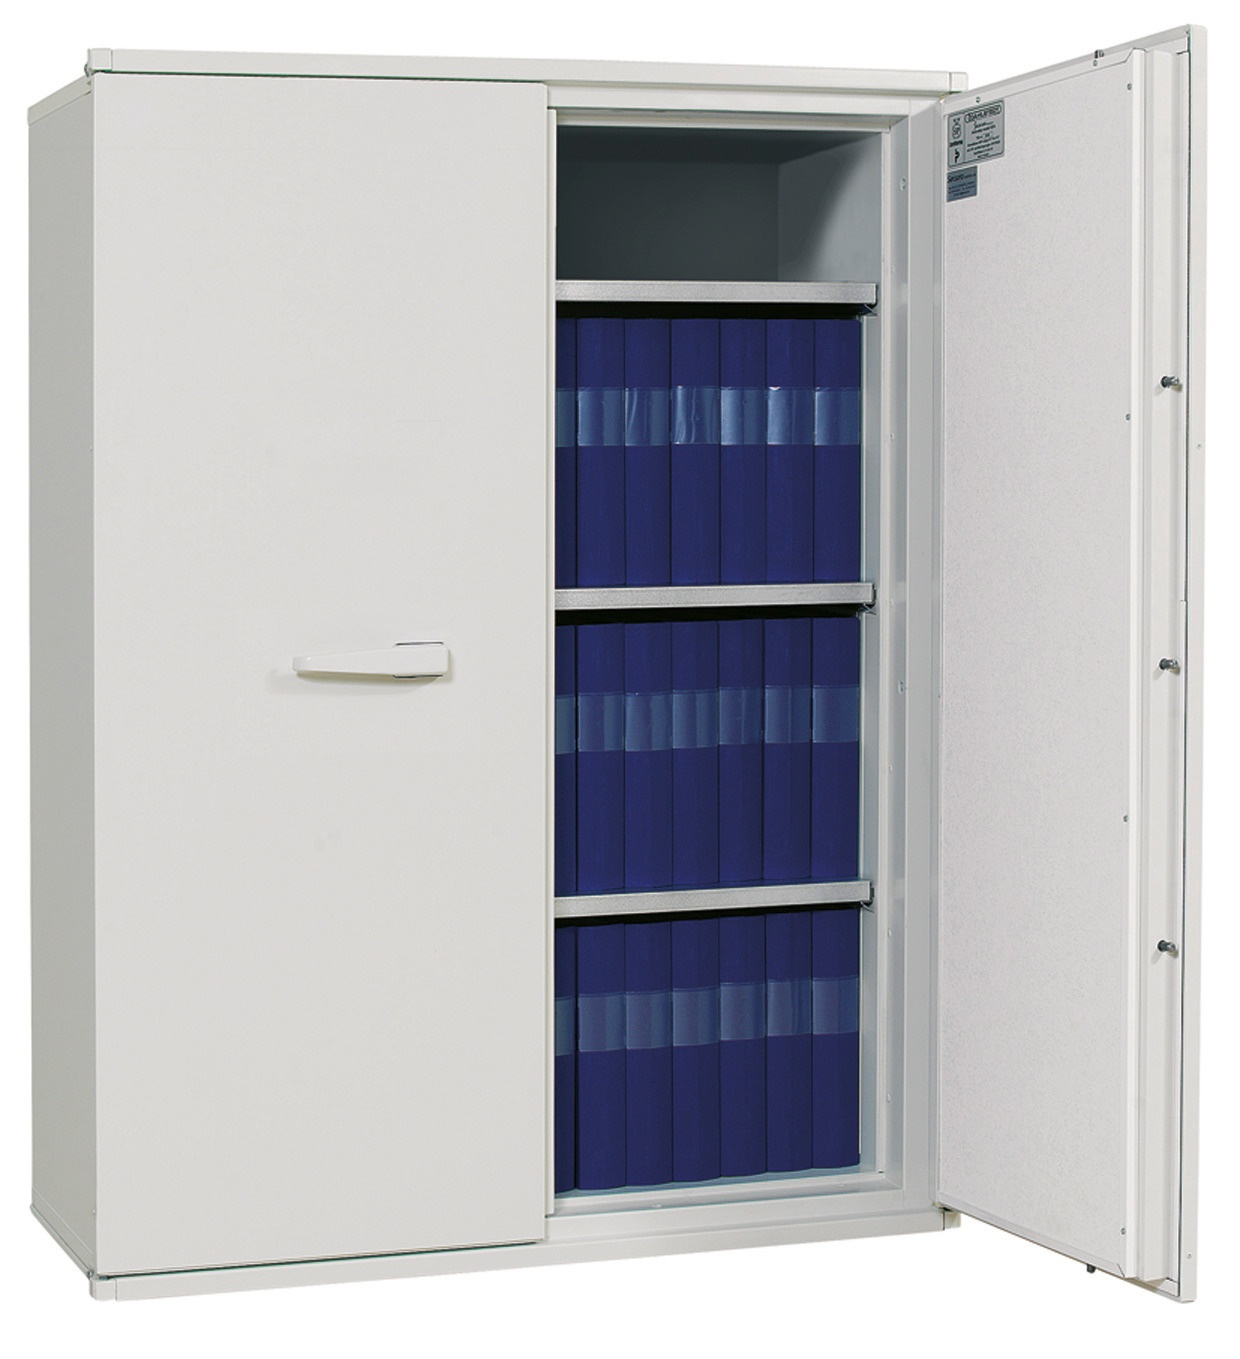 SA 390 fire-rated document cabinet